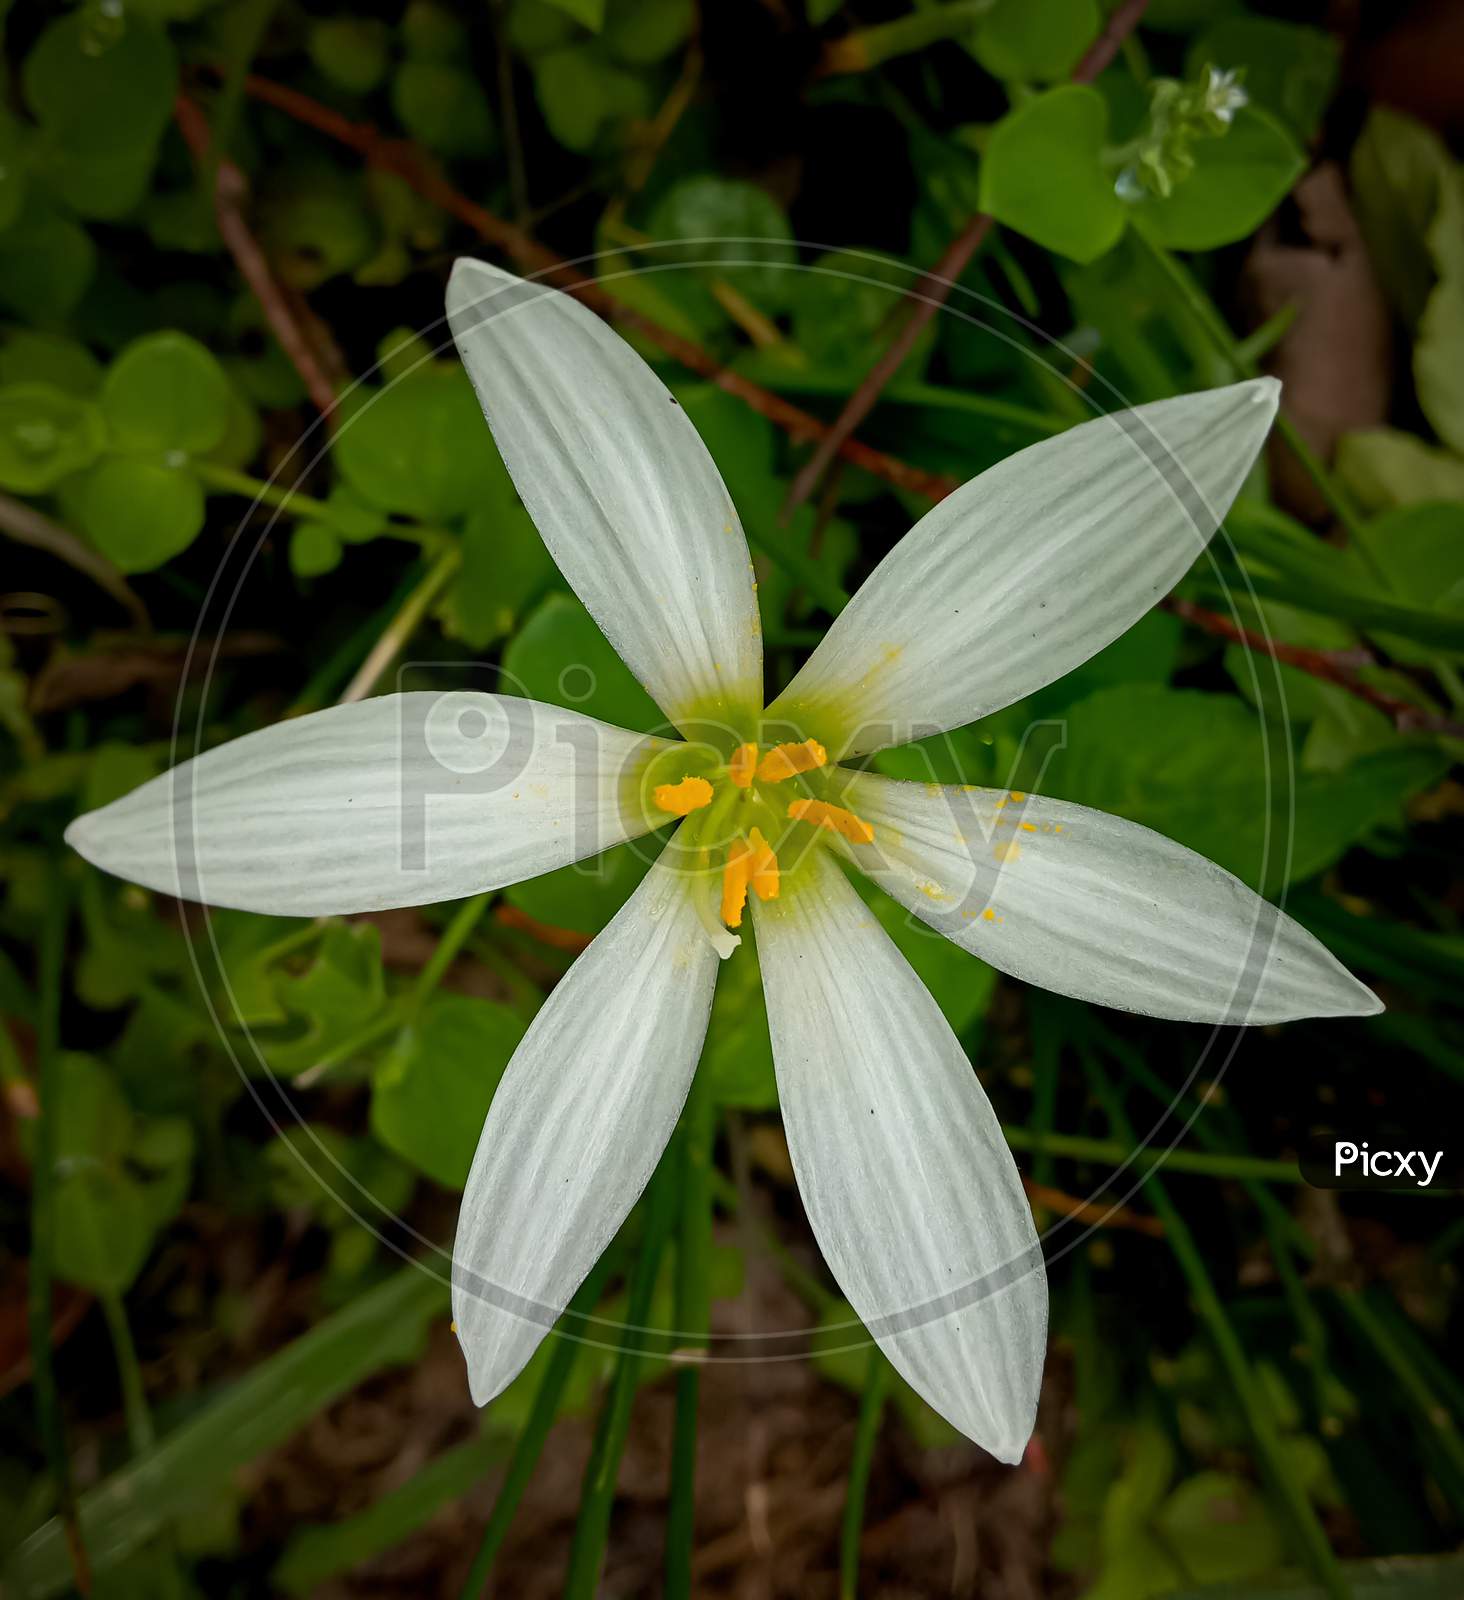 Indian Zephyranthes Candida, A Member Of The Amaryllis Family.